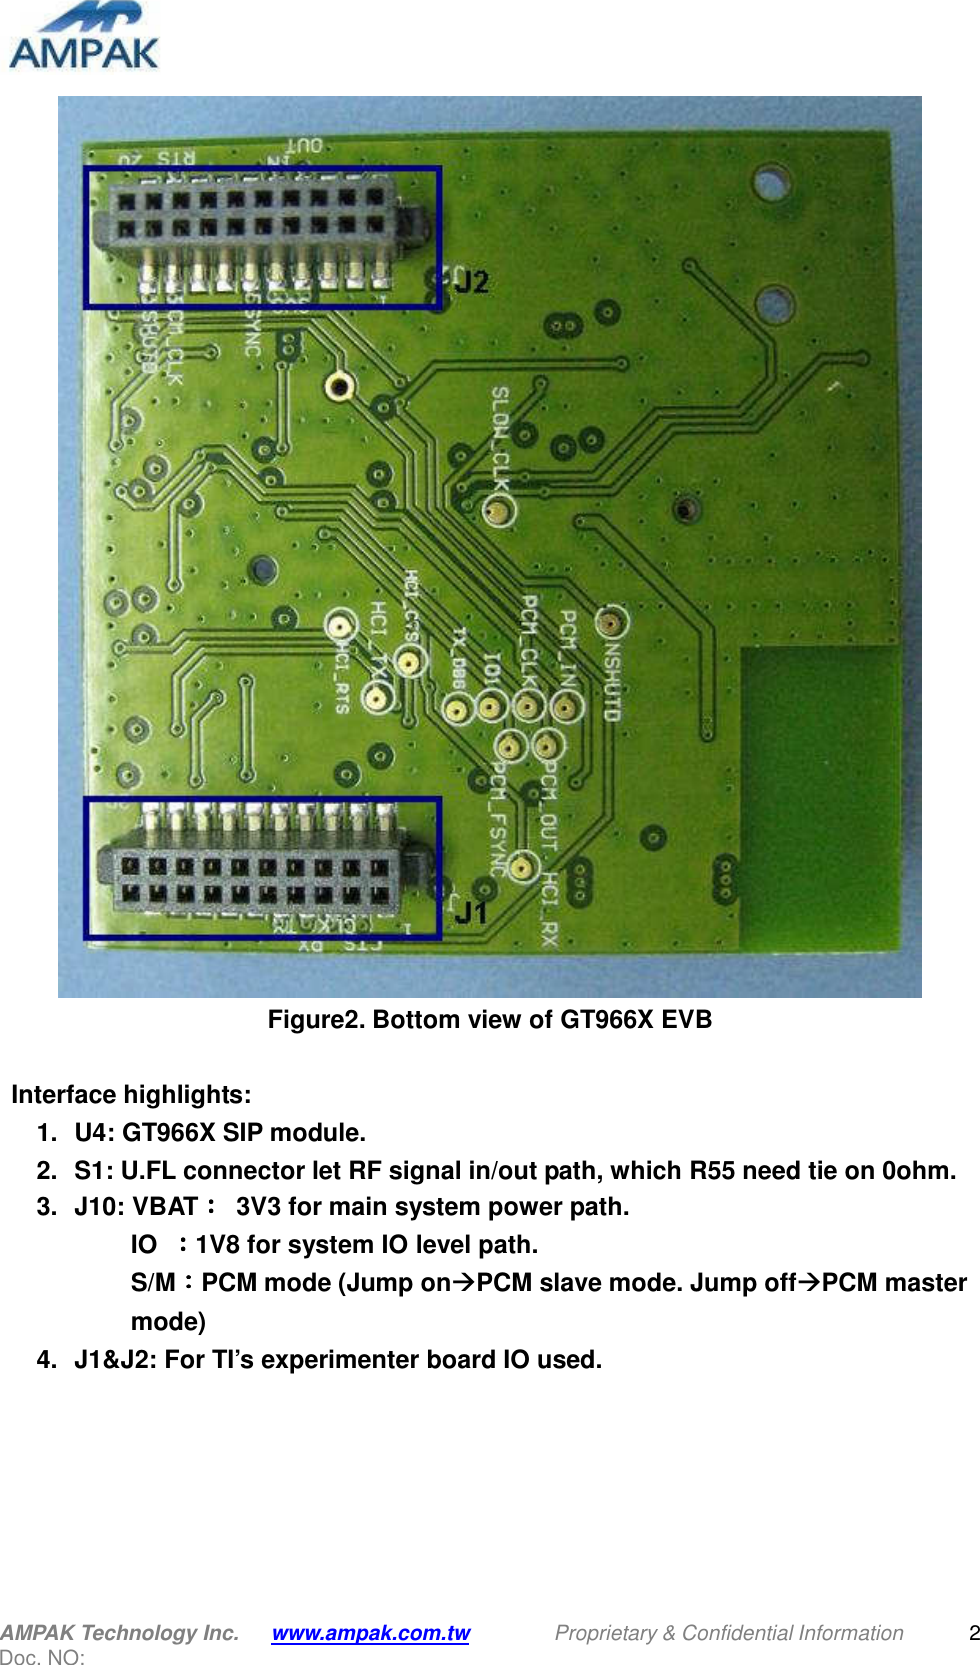  AMPAK Technology Inc.    www.ampak.com.tw    Proprietary &amp; Confidential Information   Doc. NO:  2  Figure2. Bottom view of GT966X EVB    Interface highlights: 1.  U4: GT966X SIP module. 2.  S1: U.FL connector let RF signal in/out path, which R55 need tie on 0ohm. 3.  J10: VBAT：：：：  3V3 for main system power path. IO  ：：：：1V8 for system IO level path. S/M：：：：PCM mode (Jump onPCM slave mode. Jump offPCM master mode) 4.  J1&amp;J2: For TI’s experimenter board IO used.   